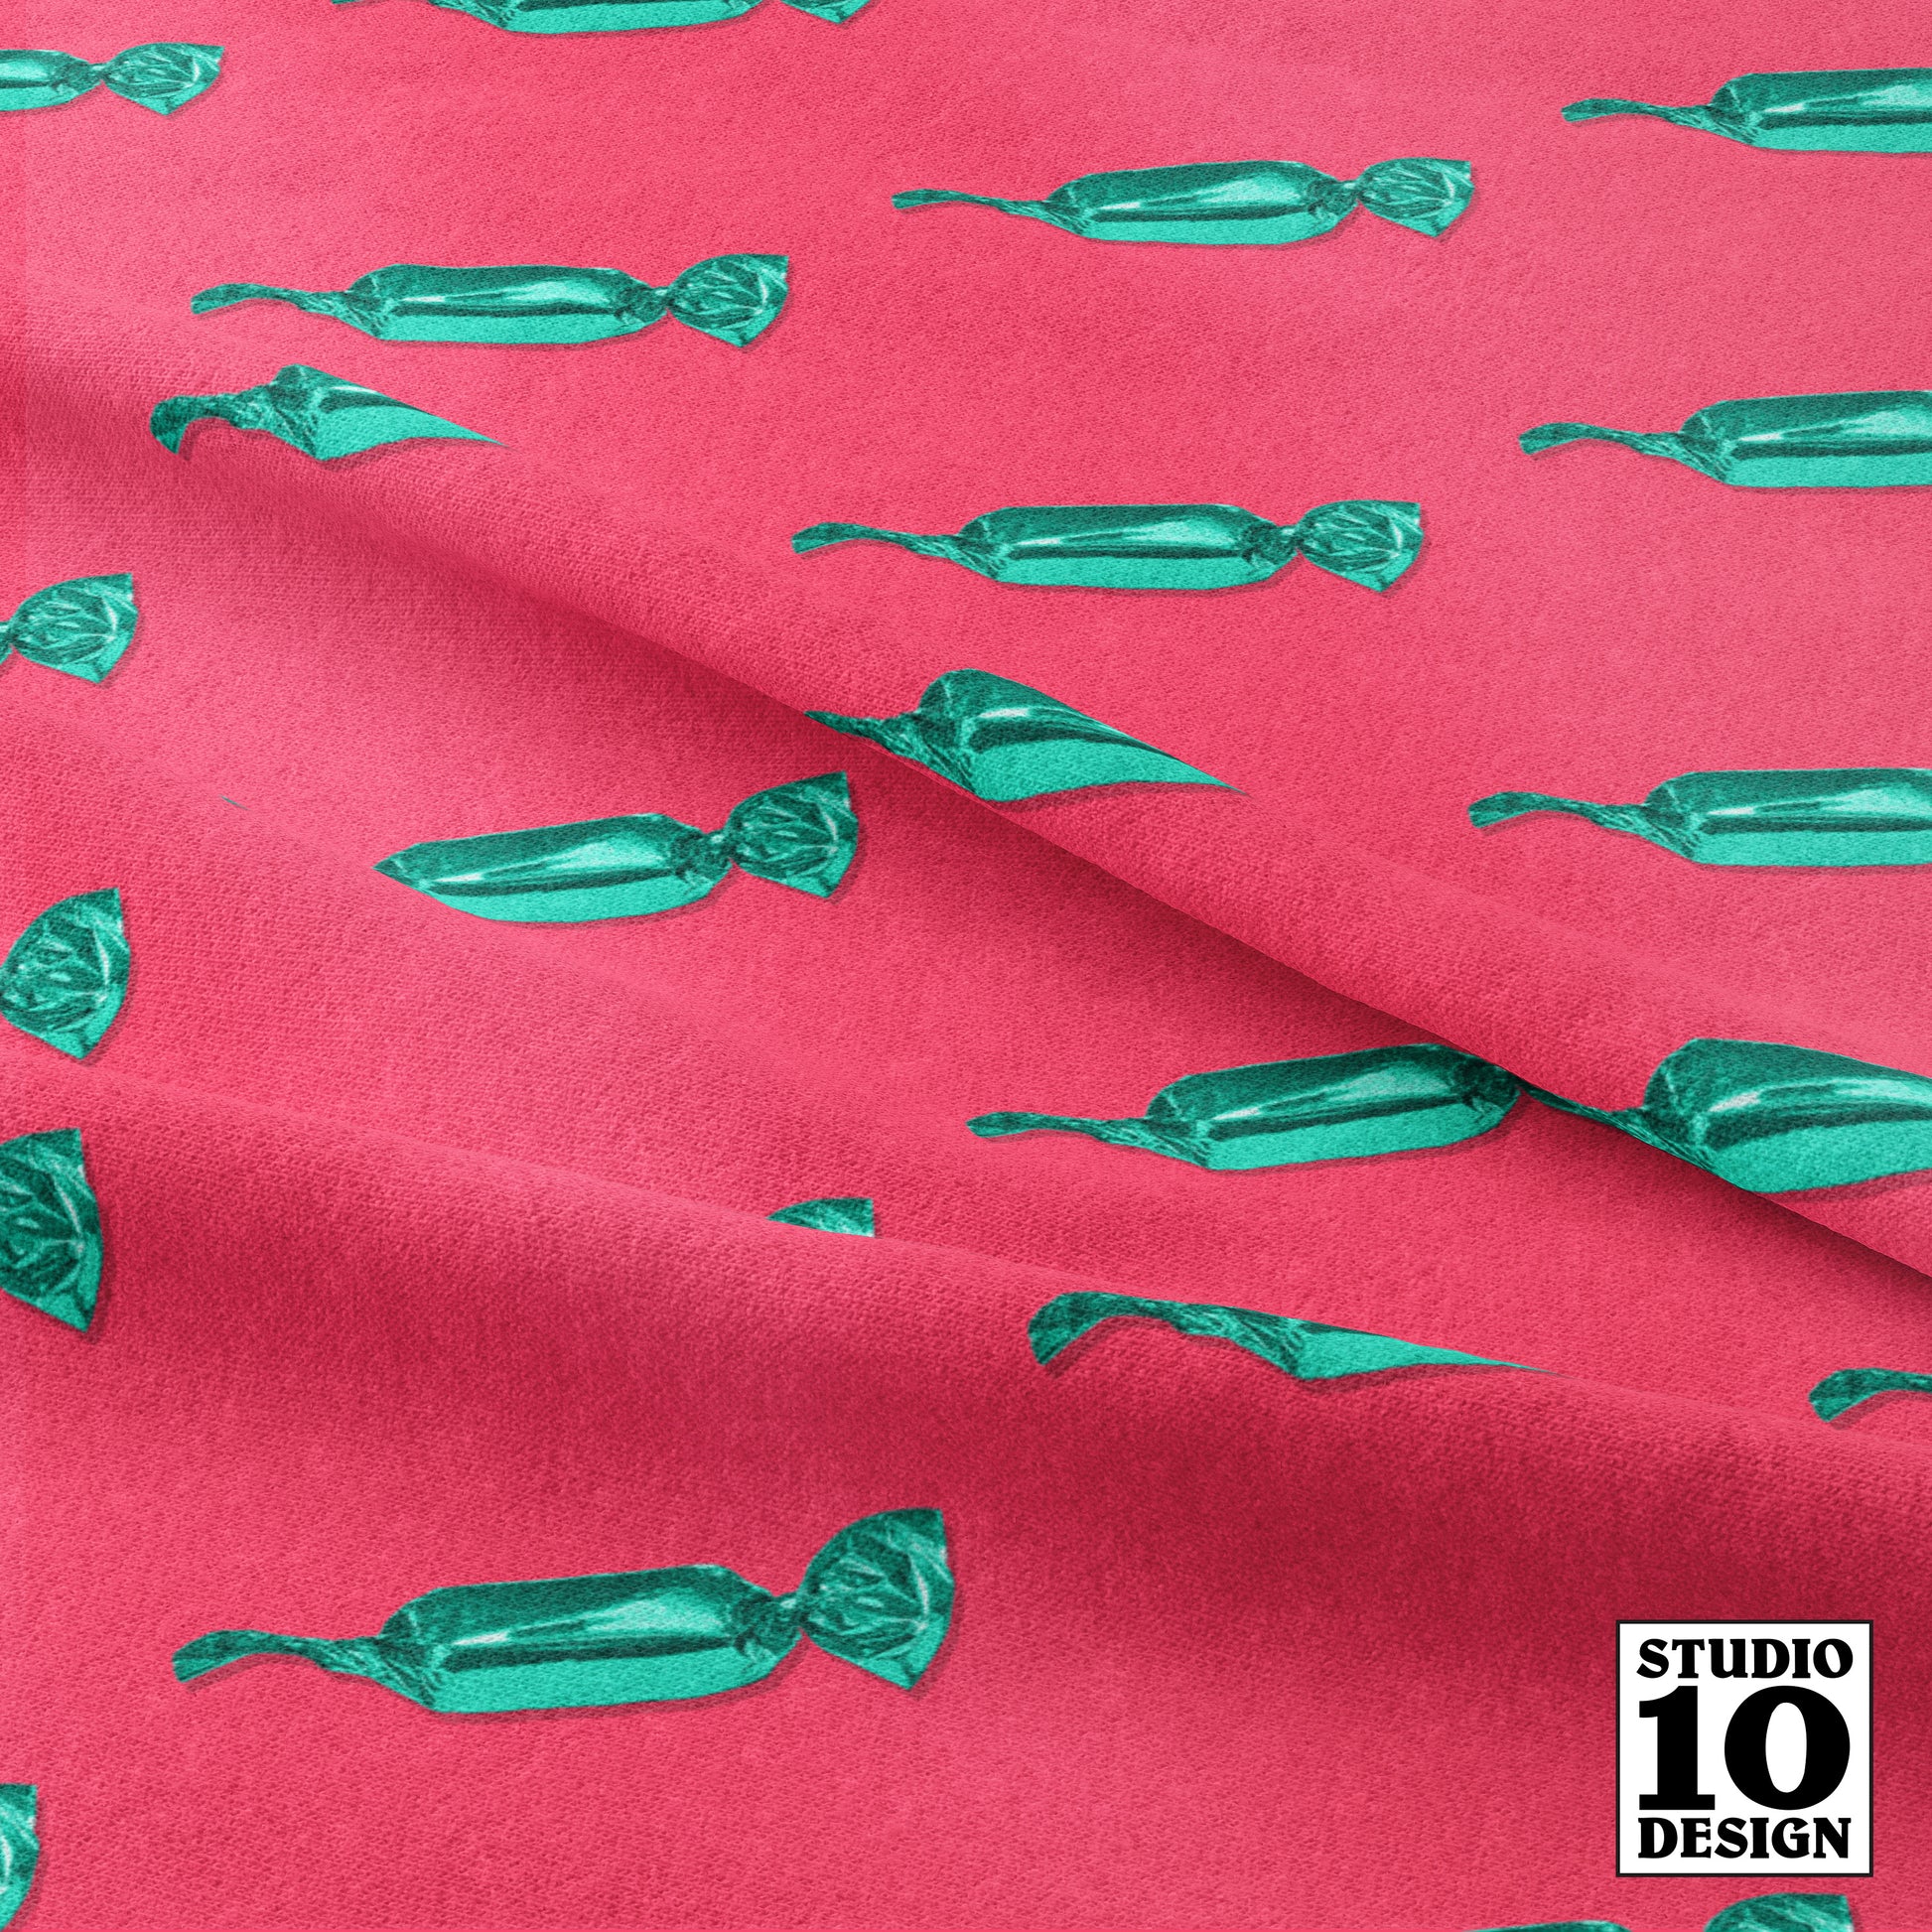 Hard Candy, Green & Pink Printed Fabric by Studio Ten Design